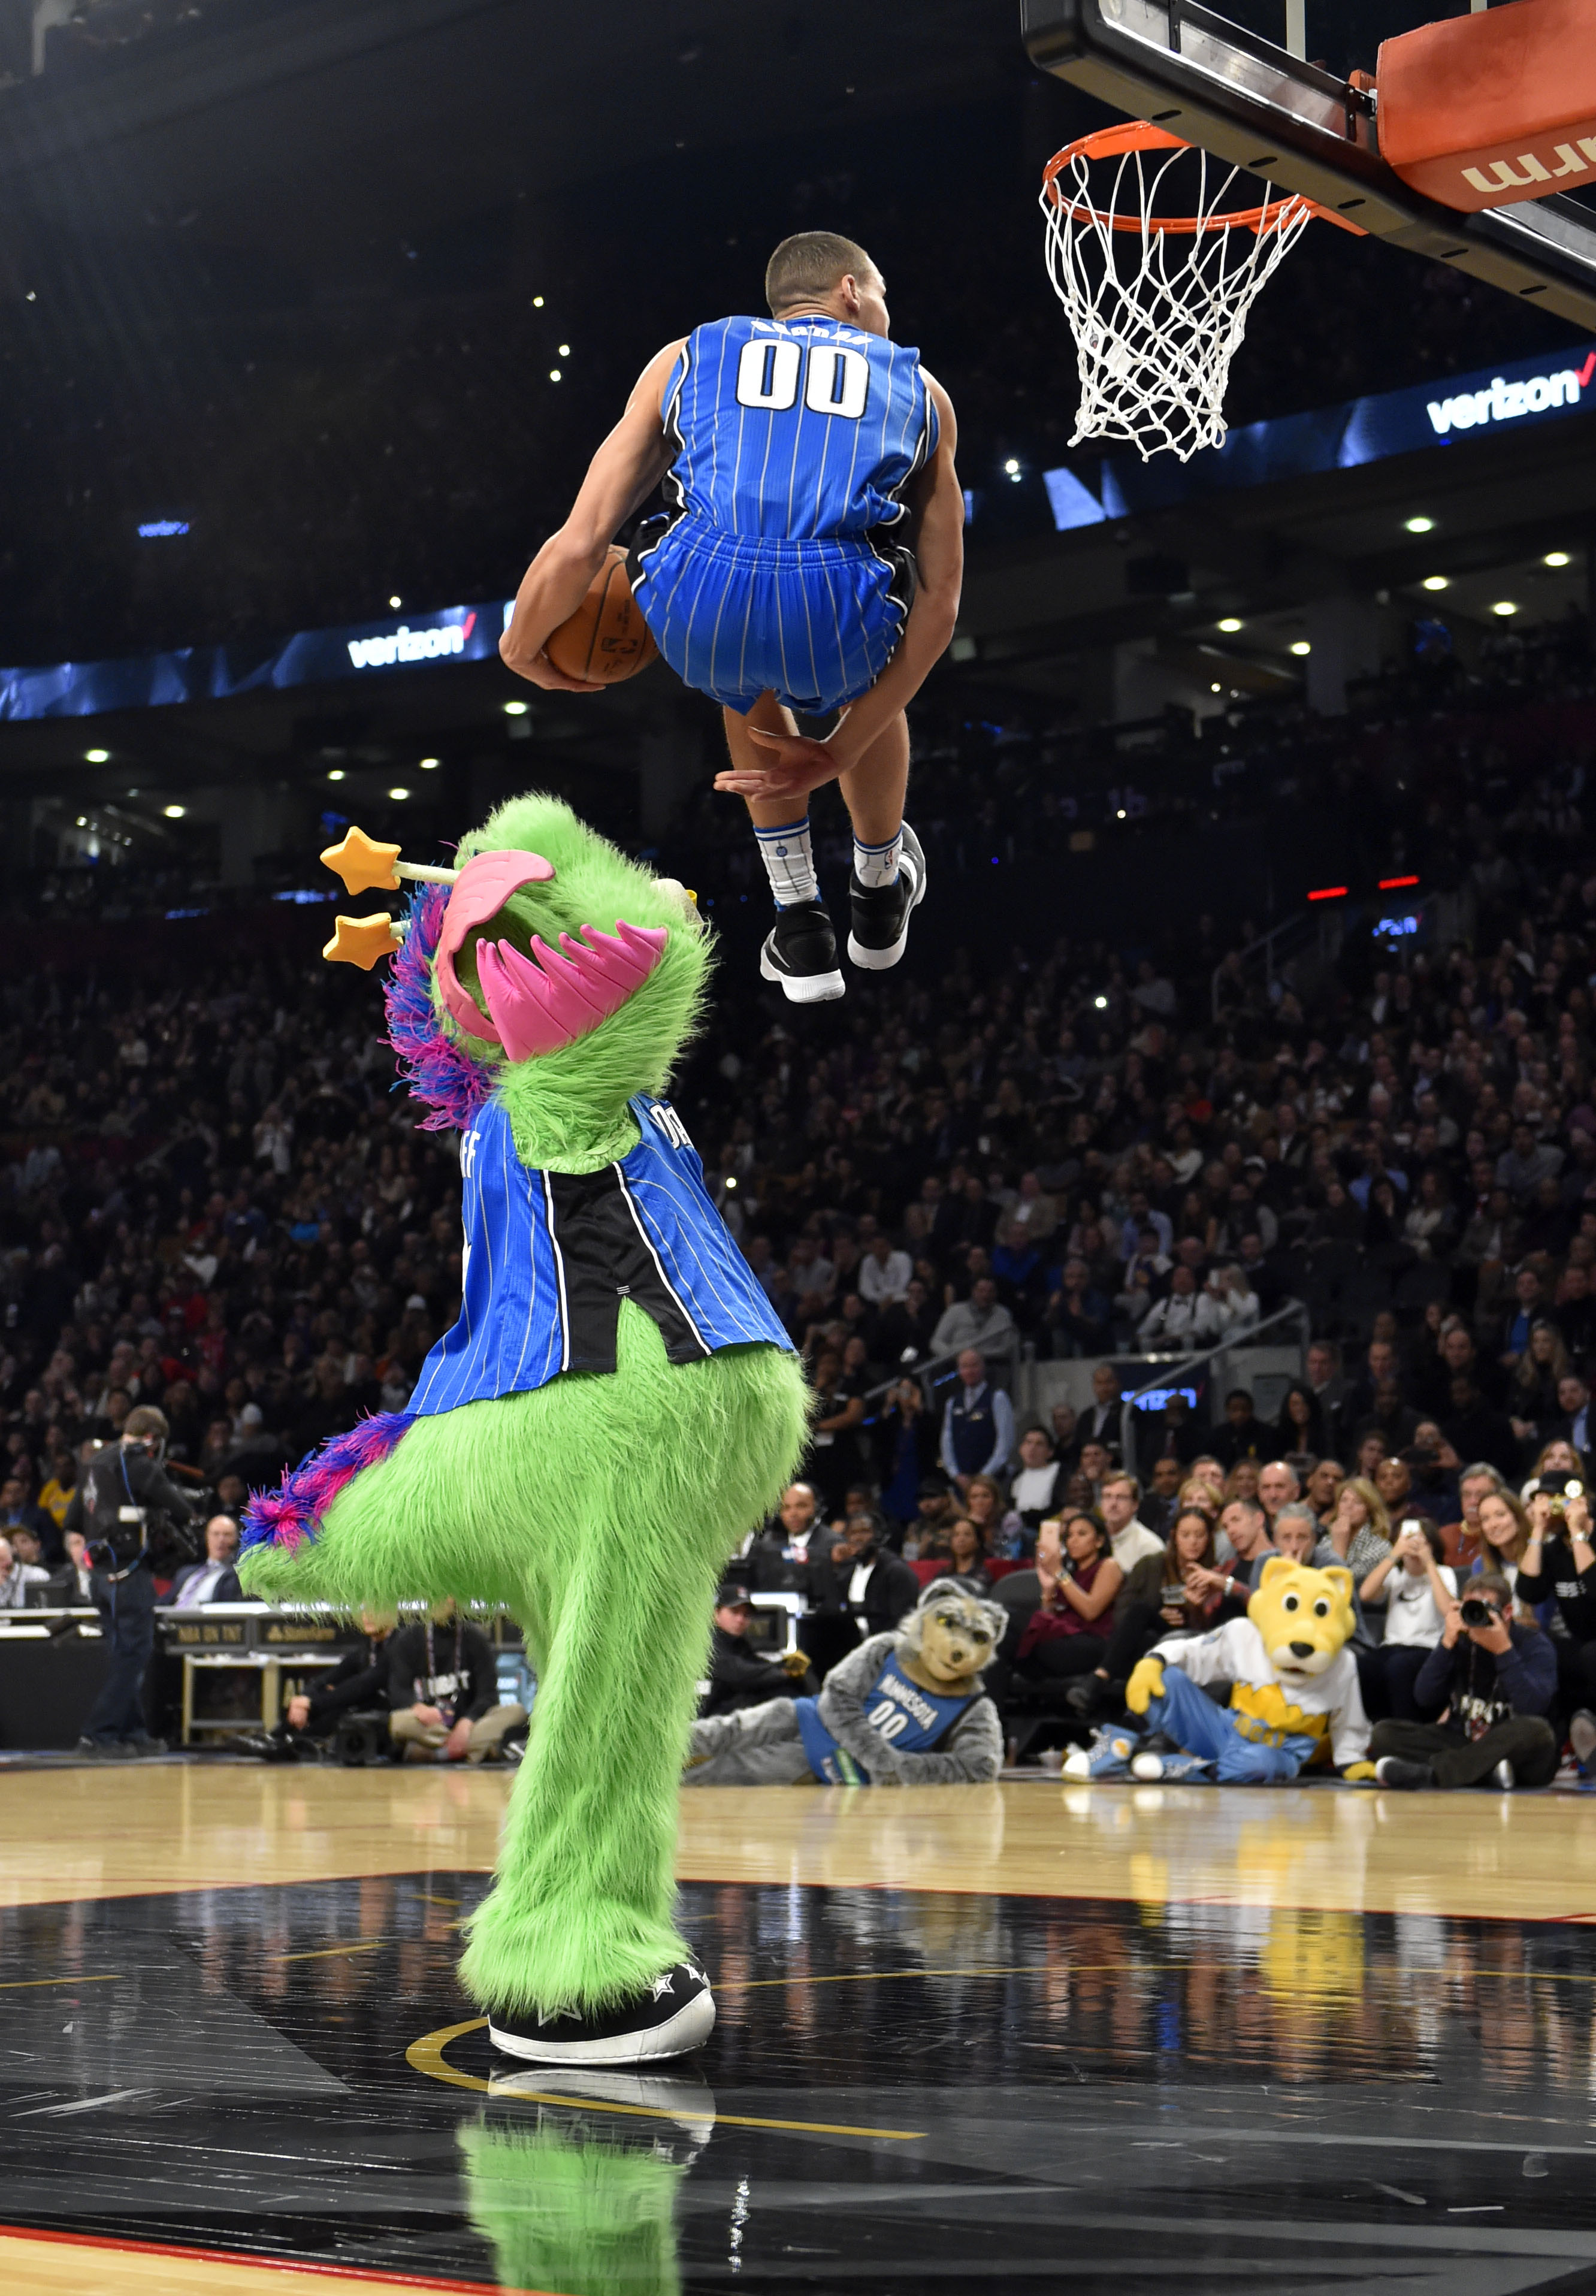 ron Gordon Had The Greatest Dunk In Slam Dunk Contest History For The Win